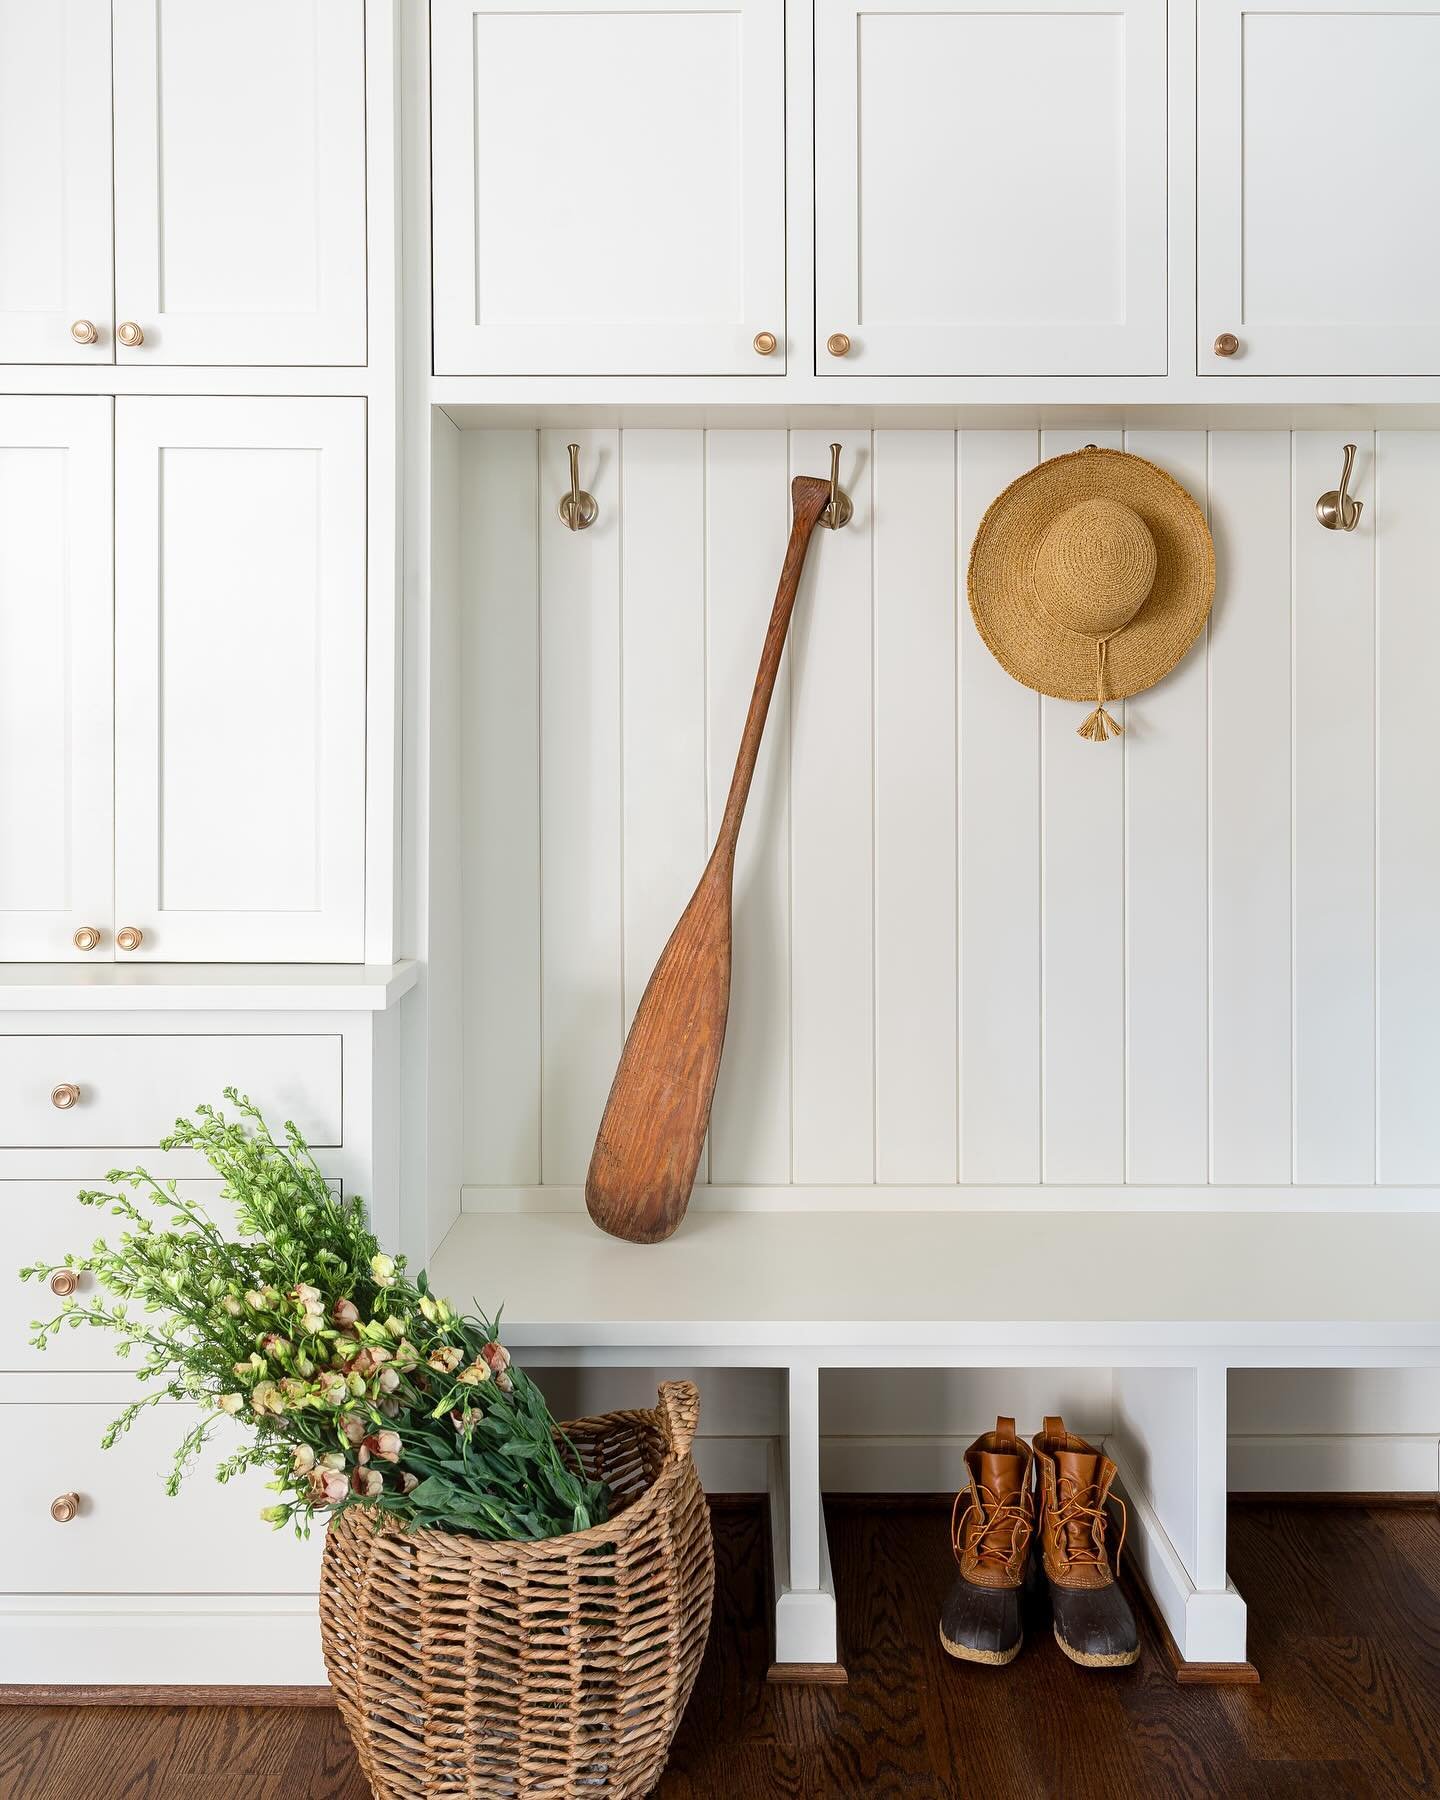 Blackstone season has officially started and this mudroom is fully embracing spring 🌷🌻🥾

Design: @karltonkellyinteriors 
Architect: @mv.architects 
Photo: @ianmichelman 

#interiors #interiordesign #architecture #mudroom #interiorphotography